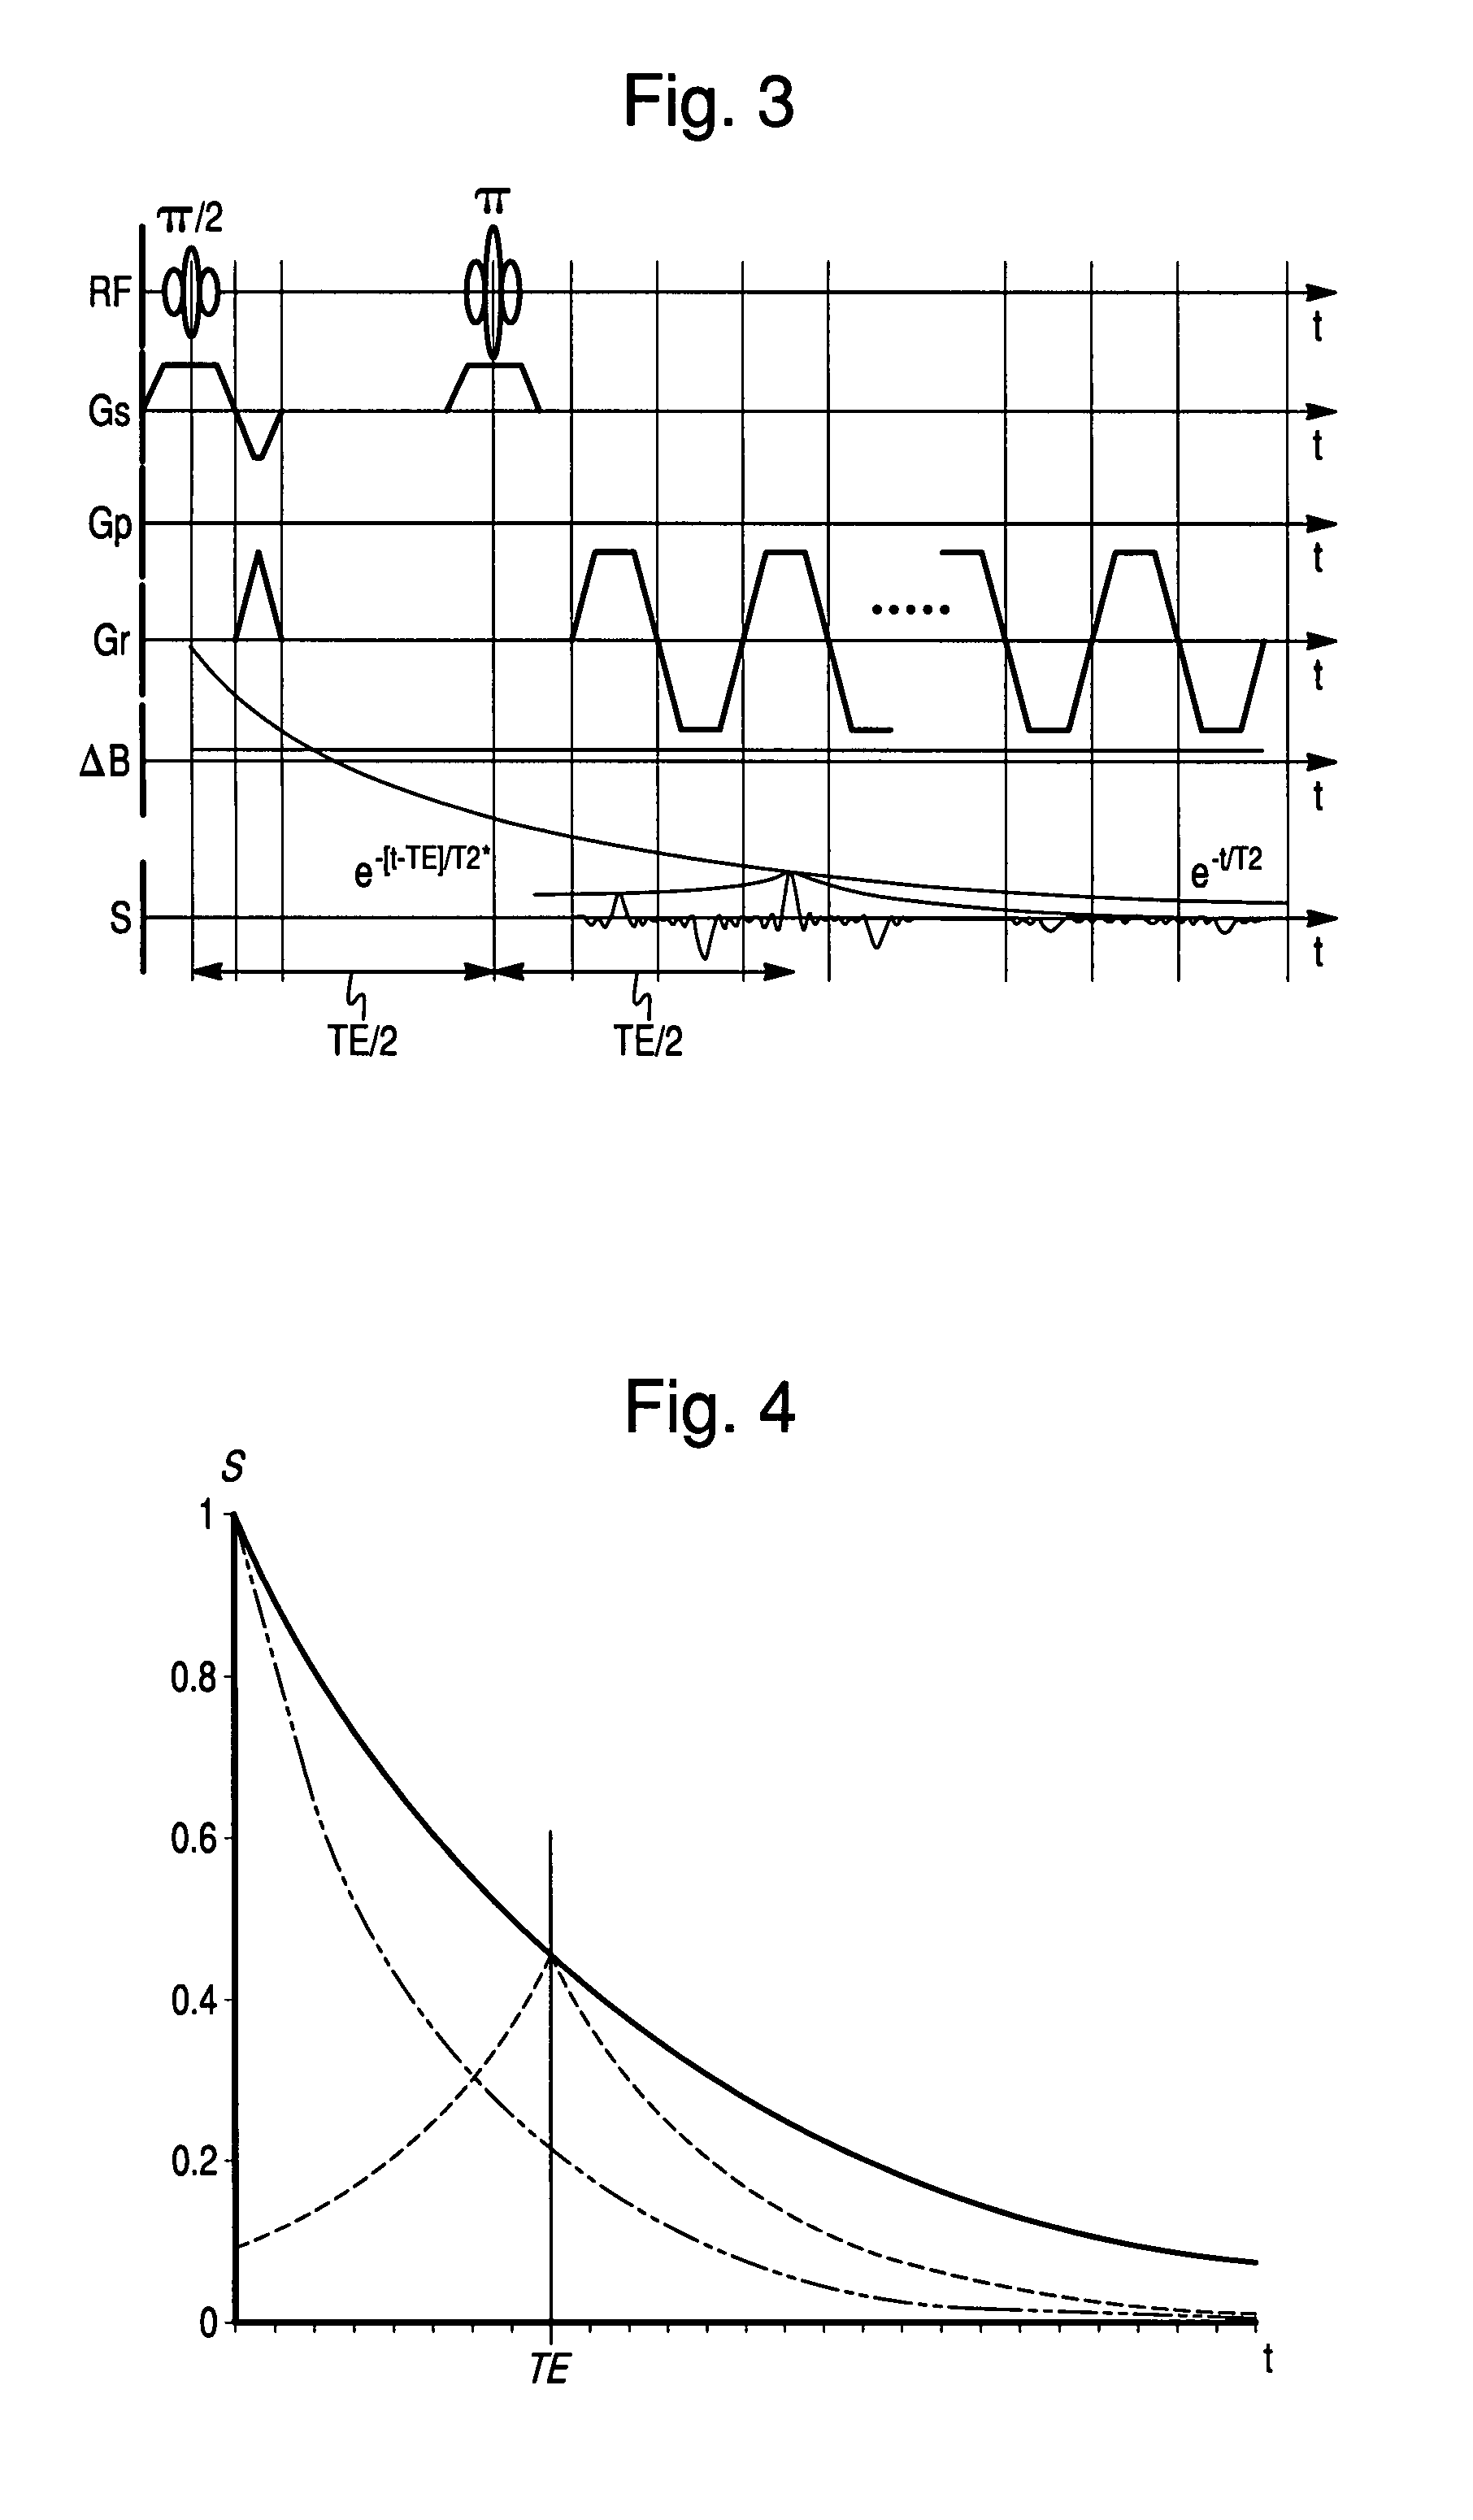 Method of obtaining a magnetic resonance image in which the streak artifacts are corrected using non-linear phase correction